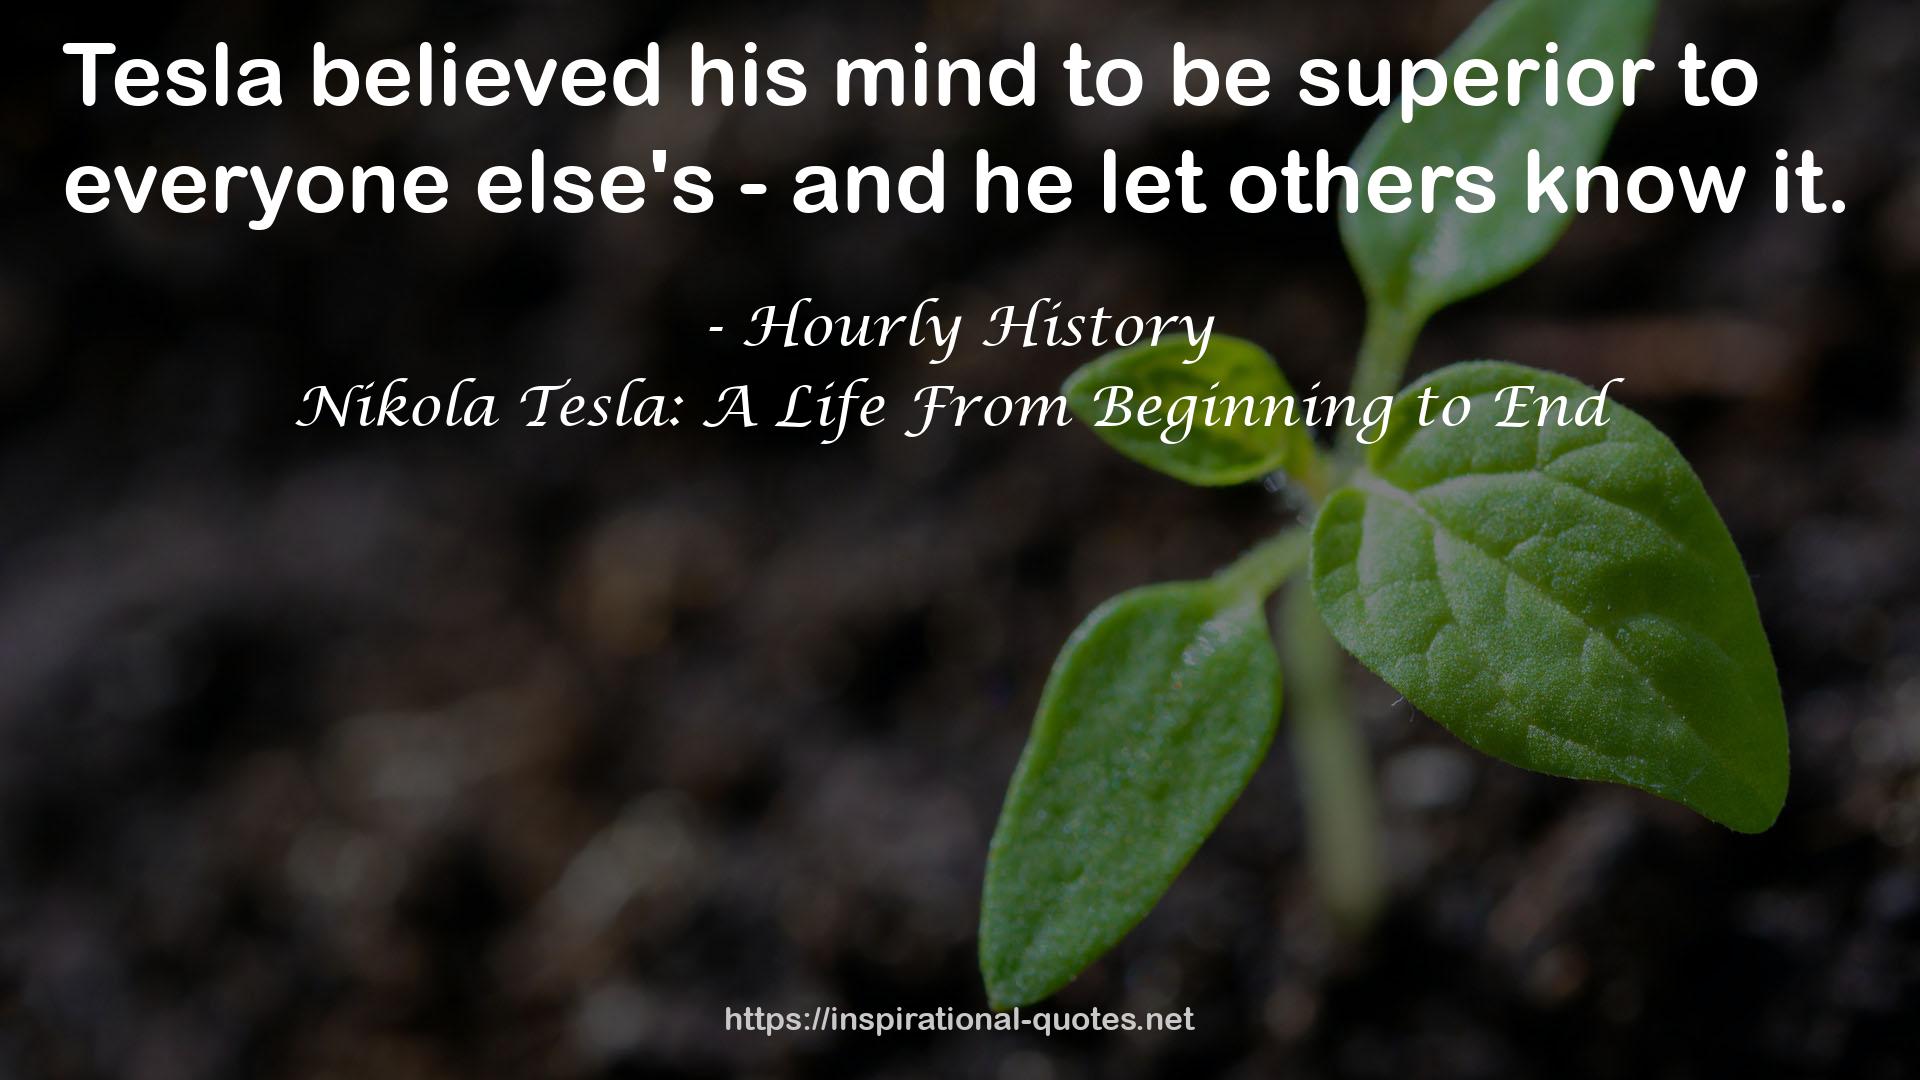 Nikola Tesla: A Life From Beginning to End QUOTES